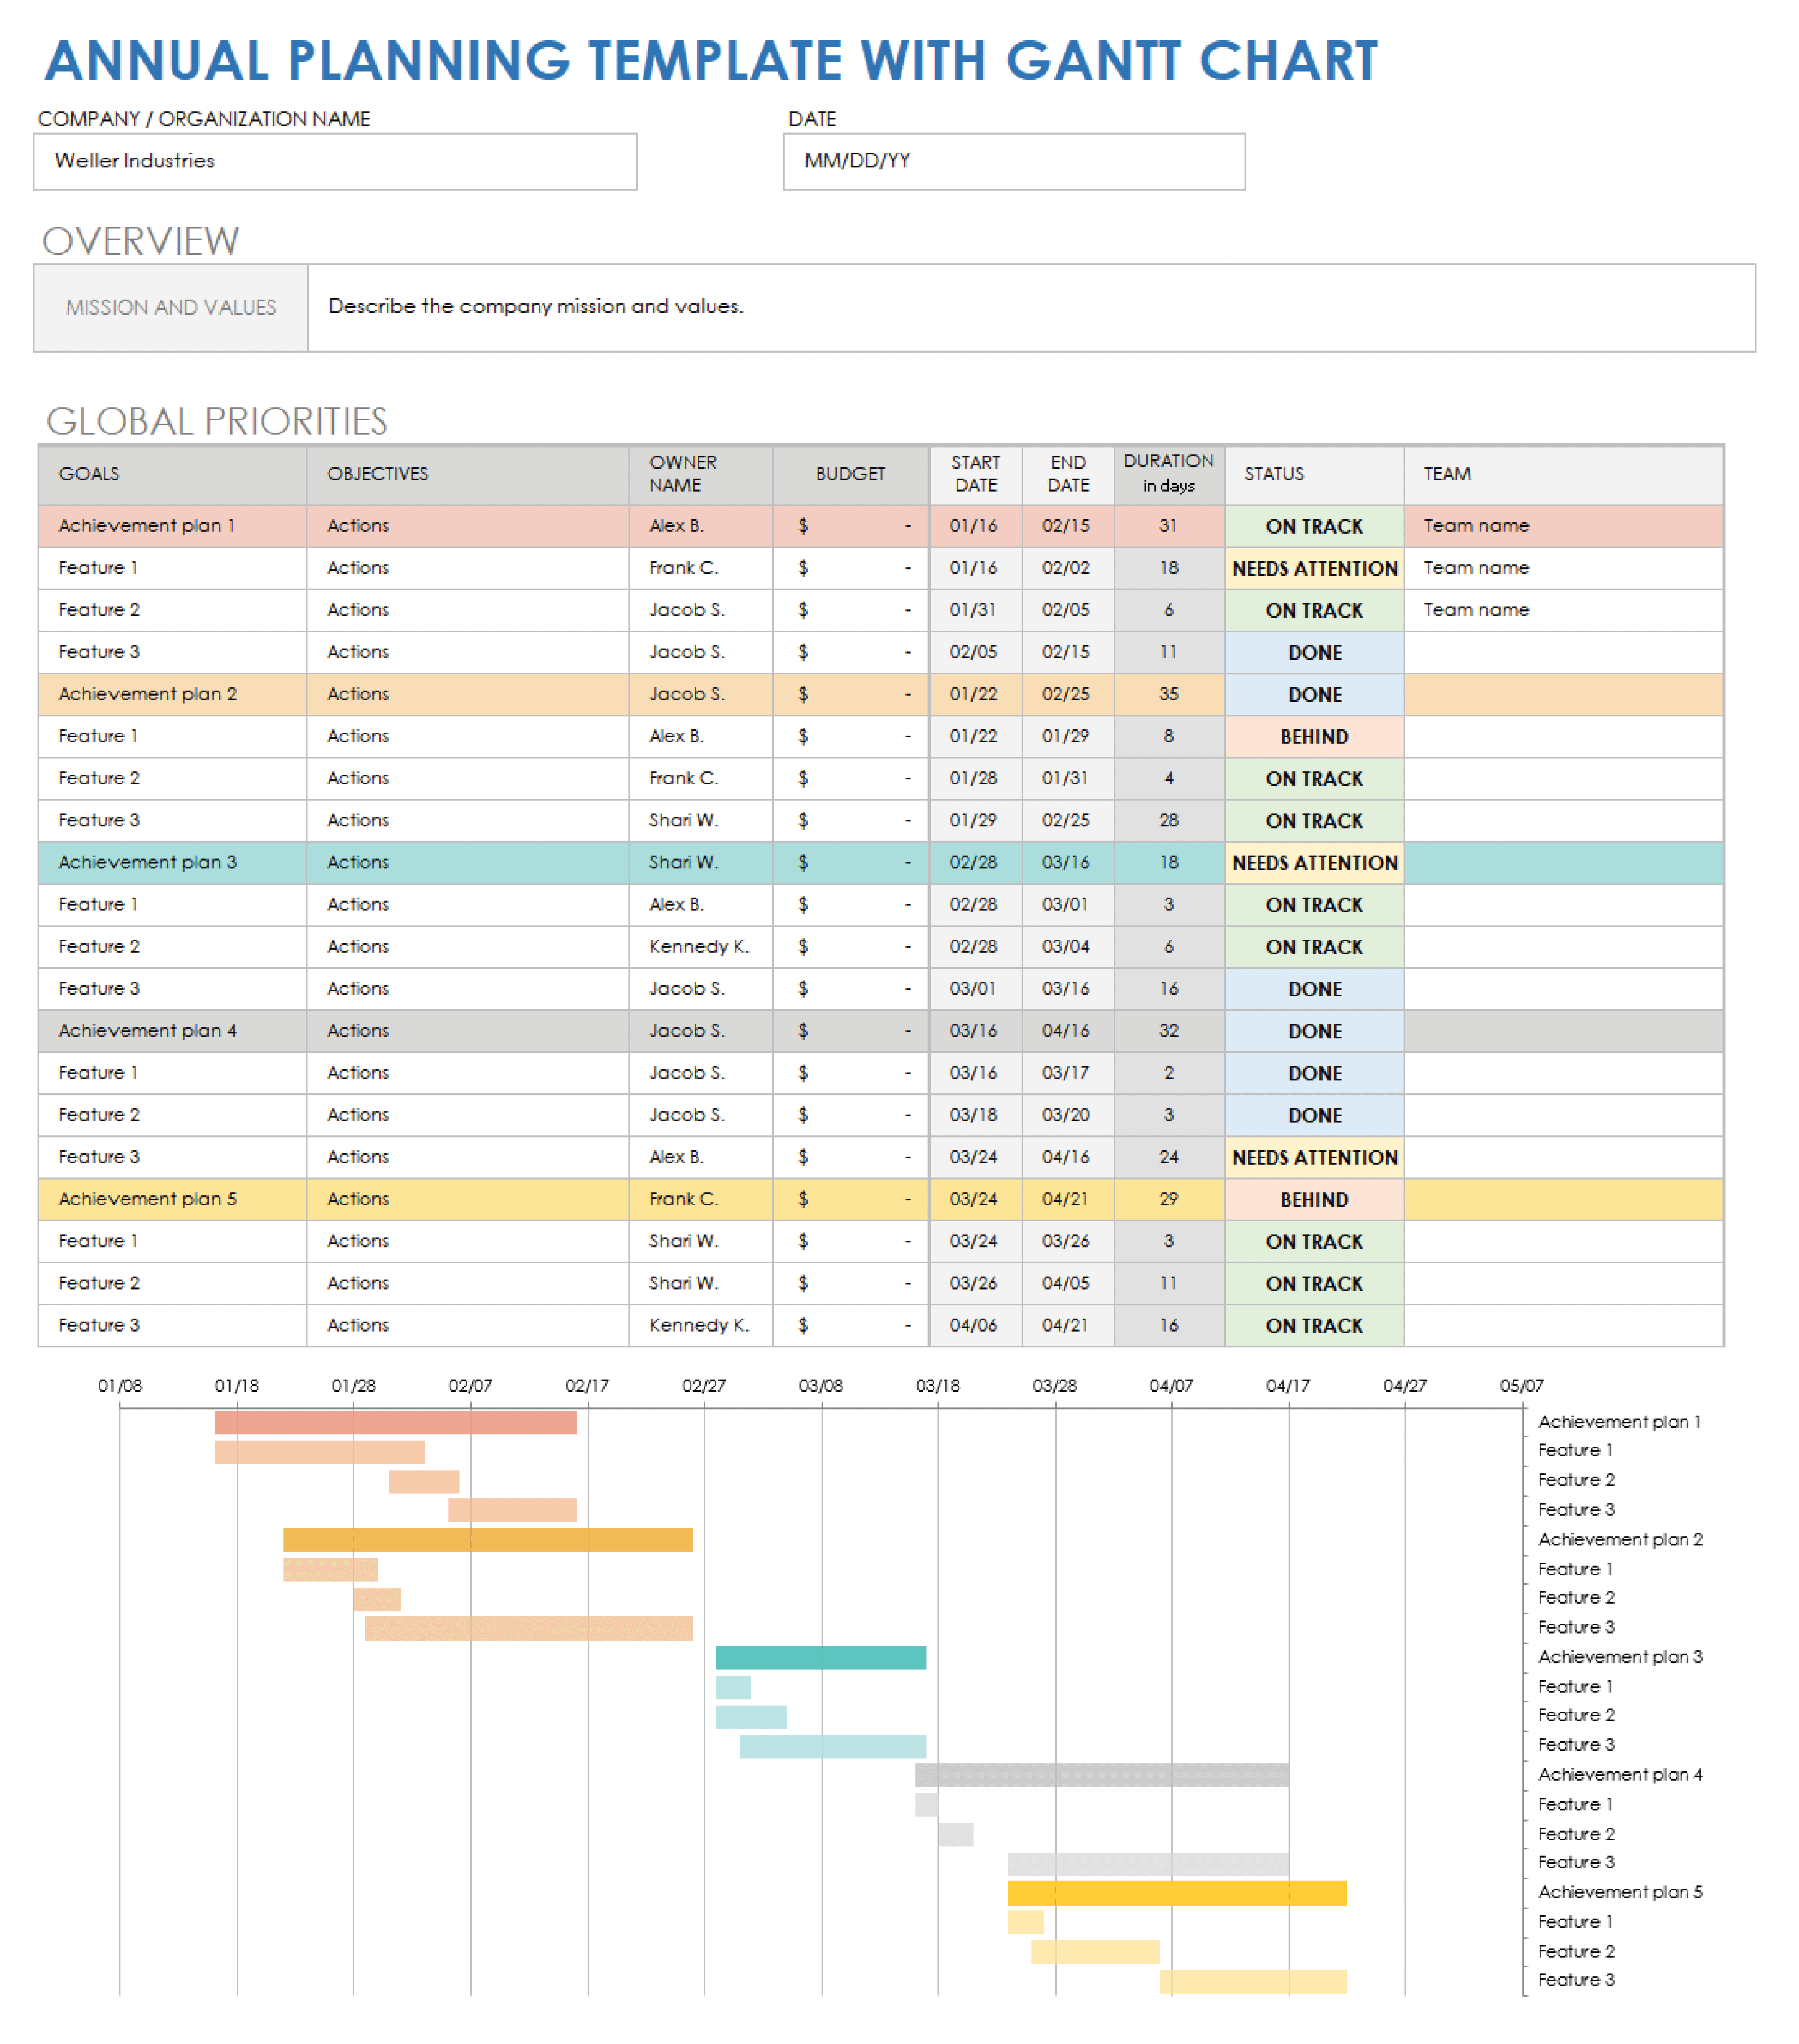 Annual Planning Template with Gantt Chart